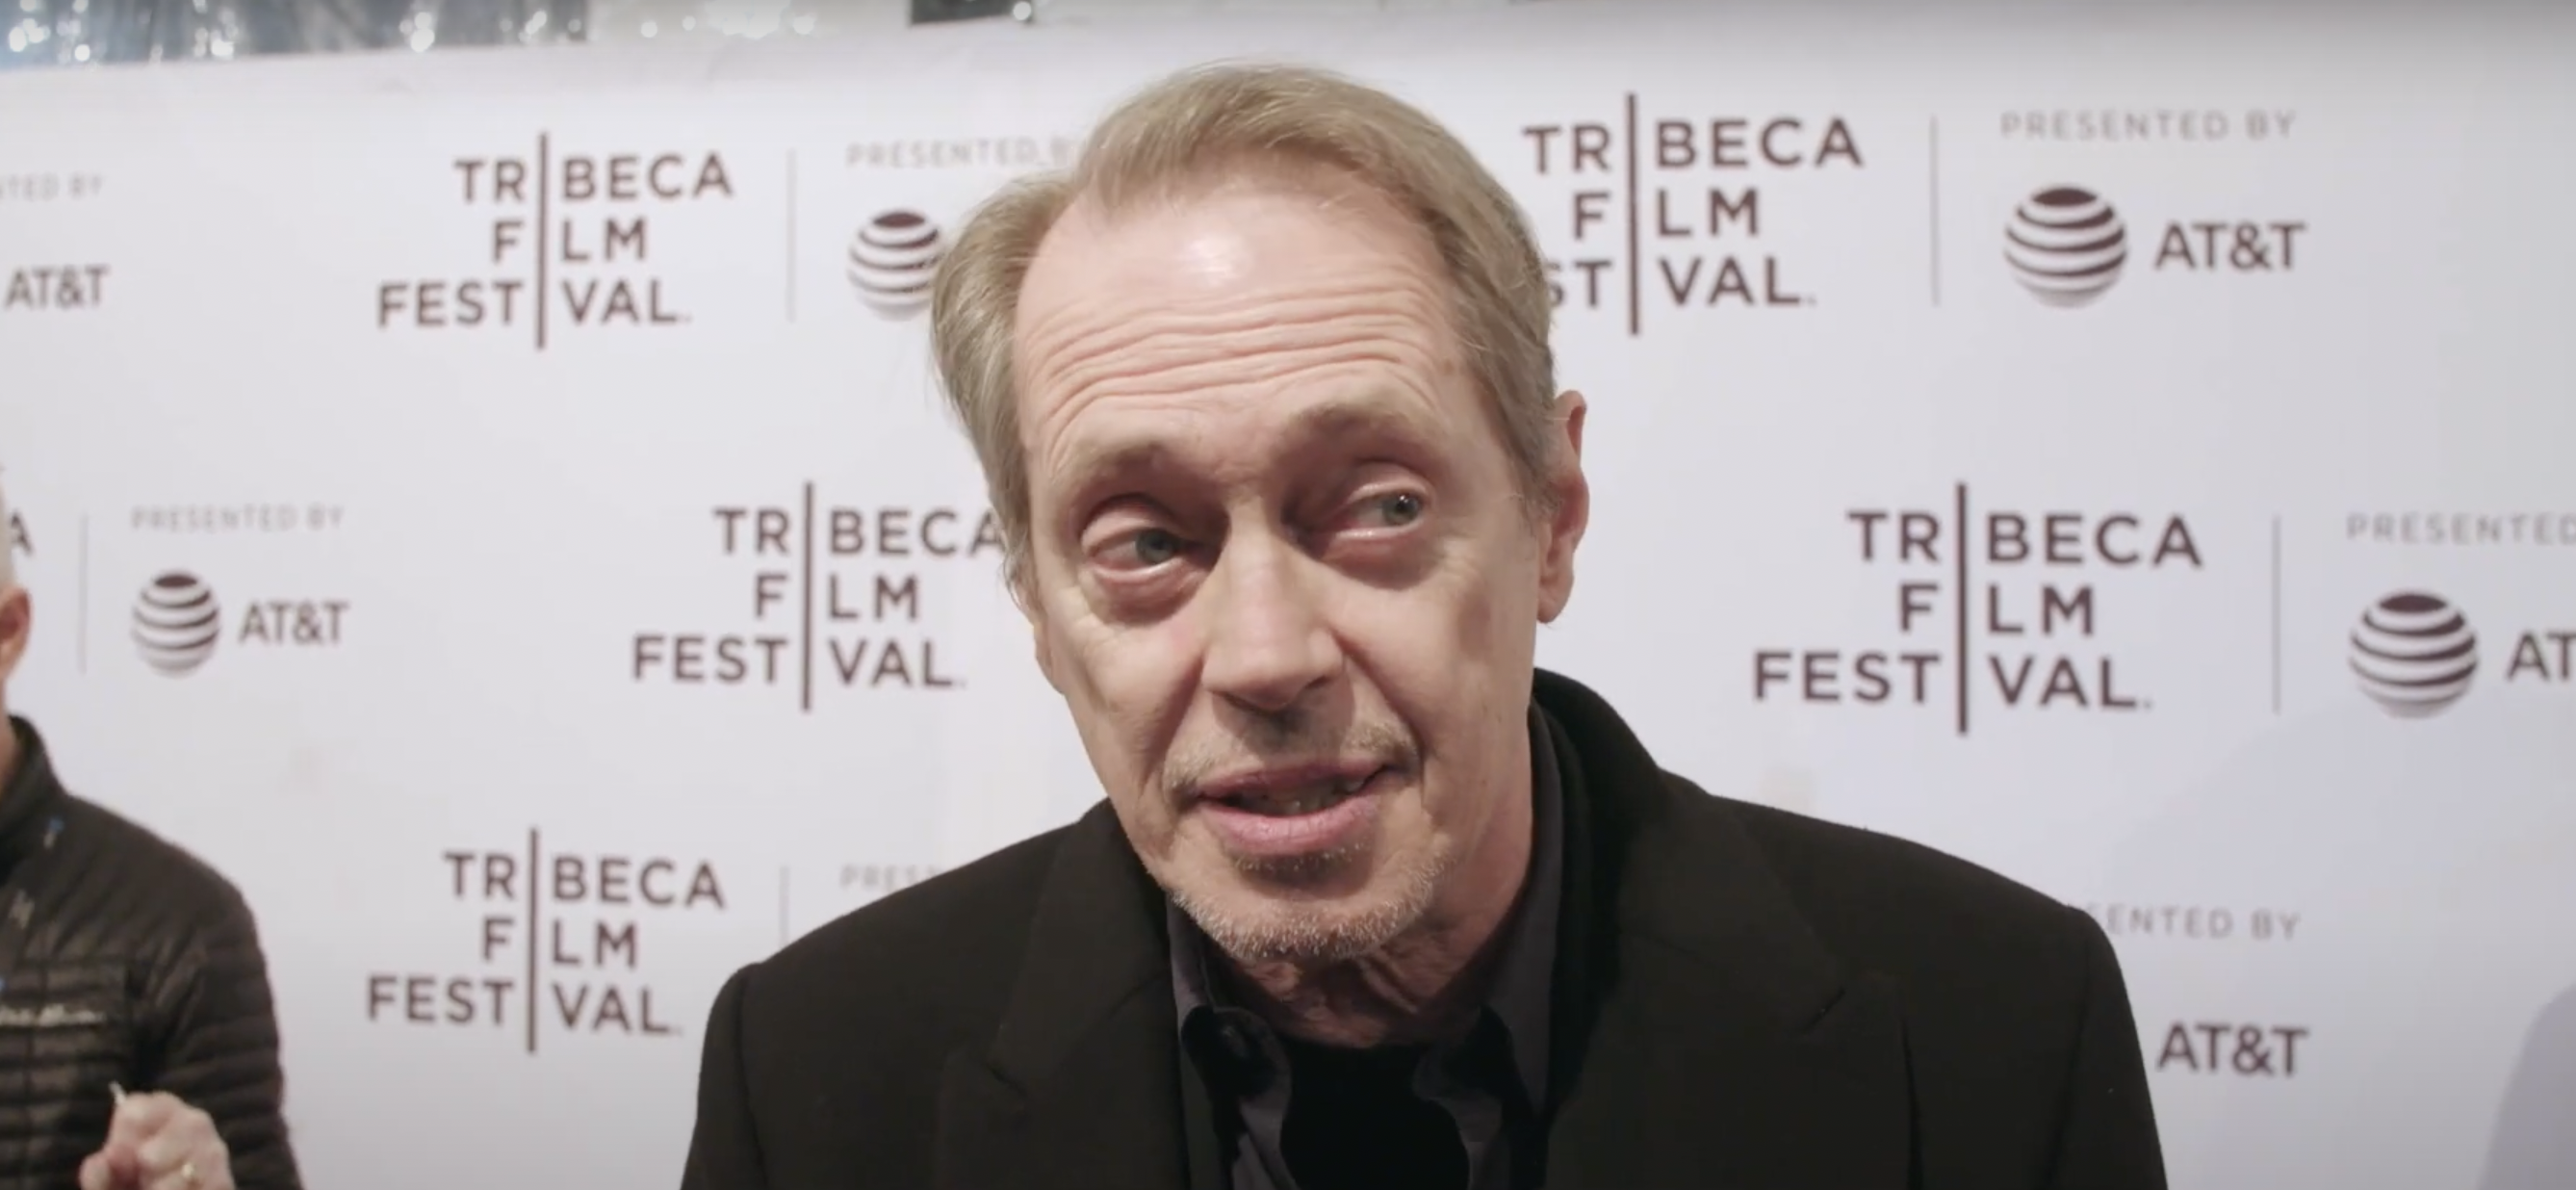 Steve Buscemi’s Gruesome Injuries Pictured After Sick Random Attack In NYC